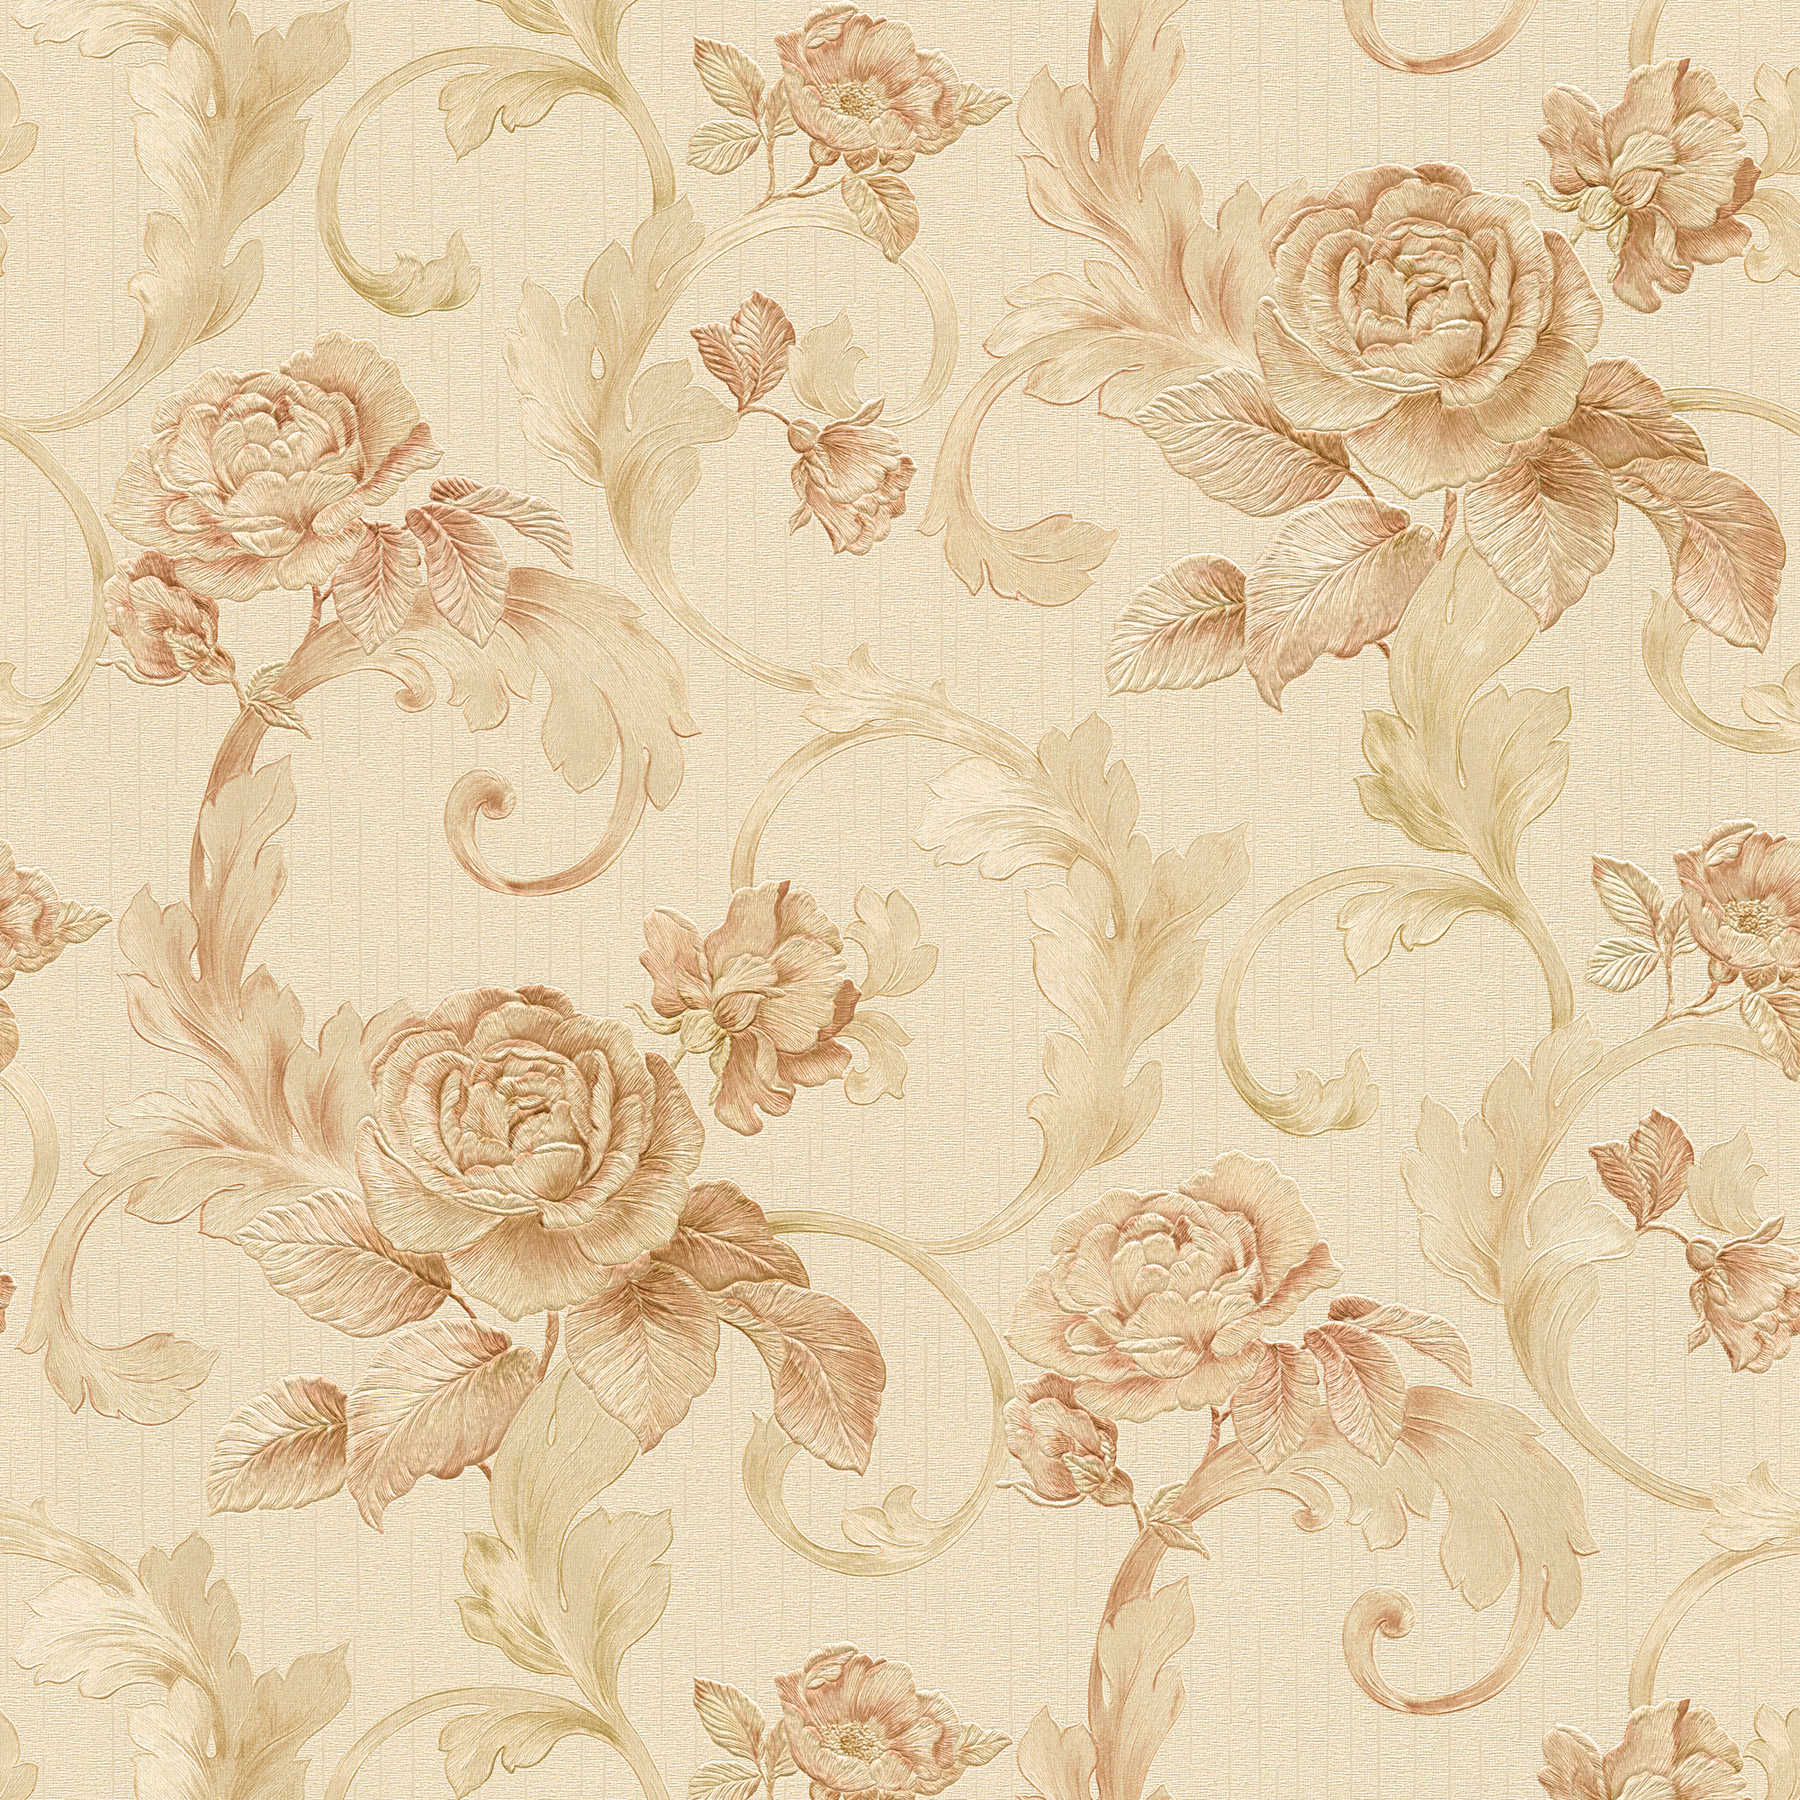         Roses wallpaper gold design with tendrils & structure effect - metallic
    